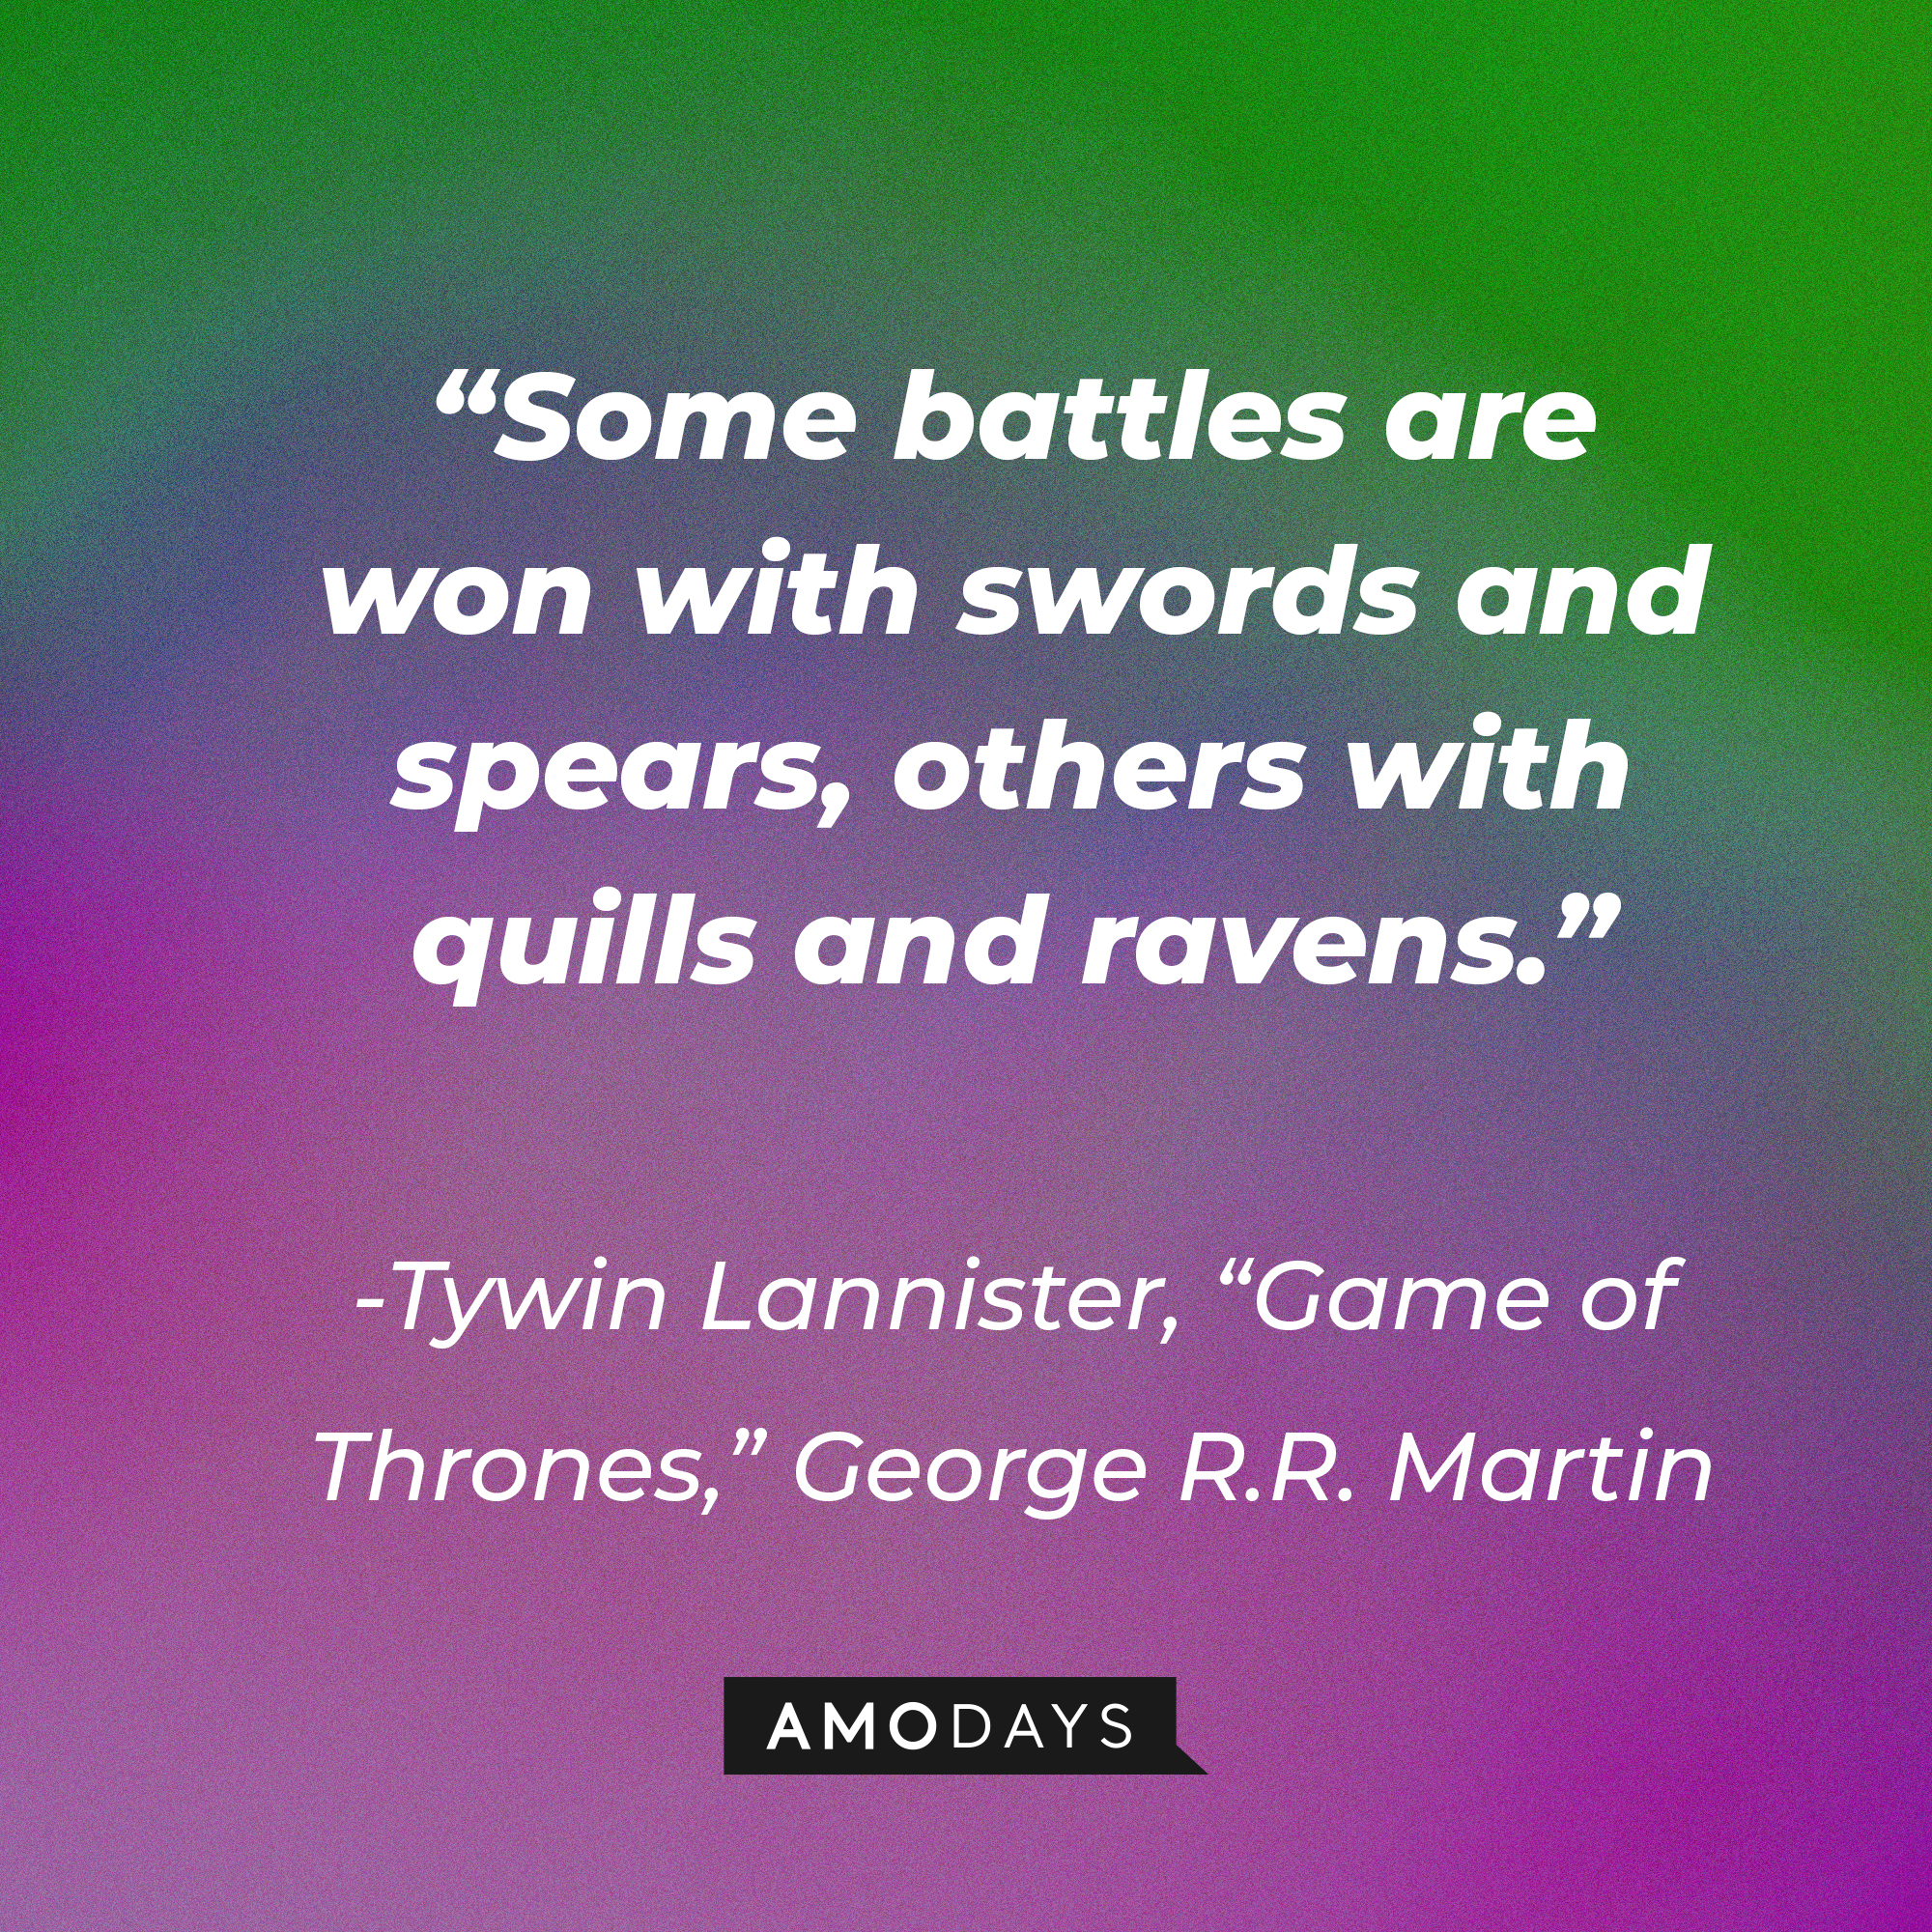 Tywin Lannister’s quote from George R.R. Martin's "Game of Thrones": “Some battles are won with swords and spears, others with quills and ravens.” | Source: AmoDays